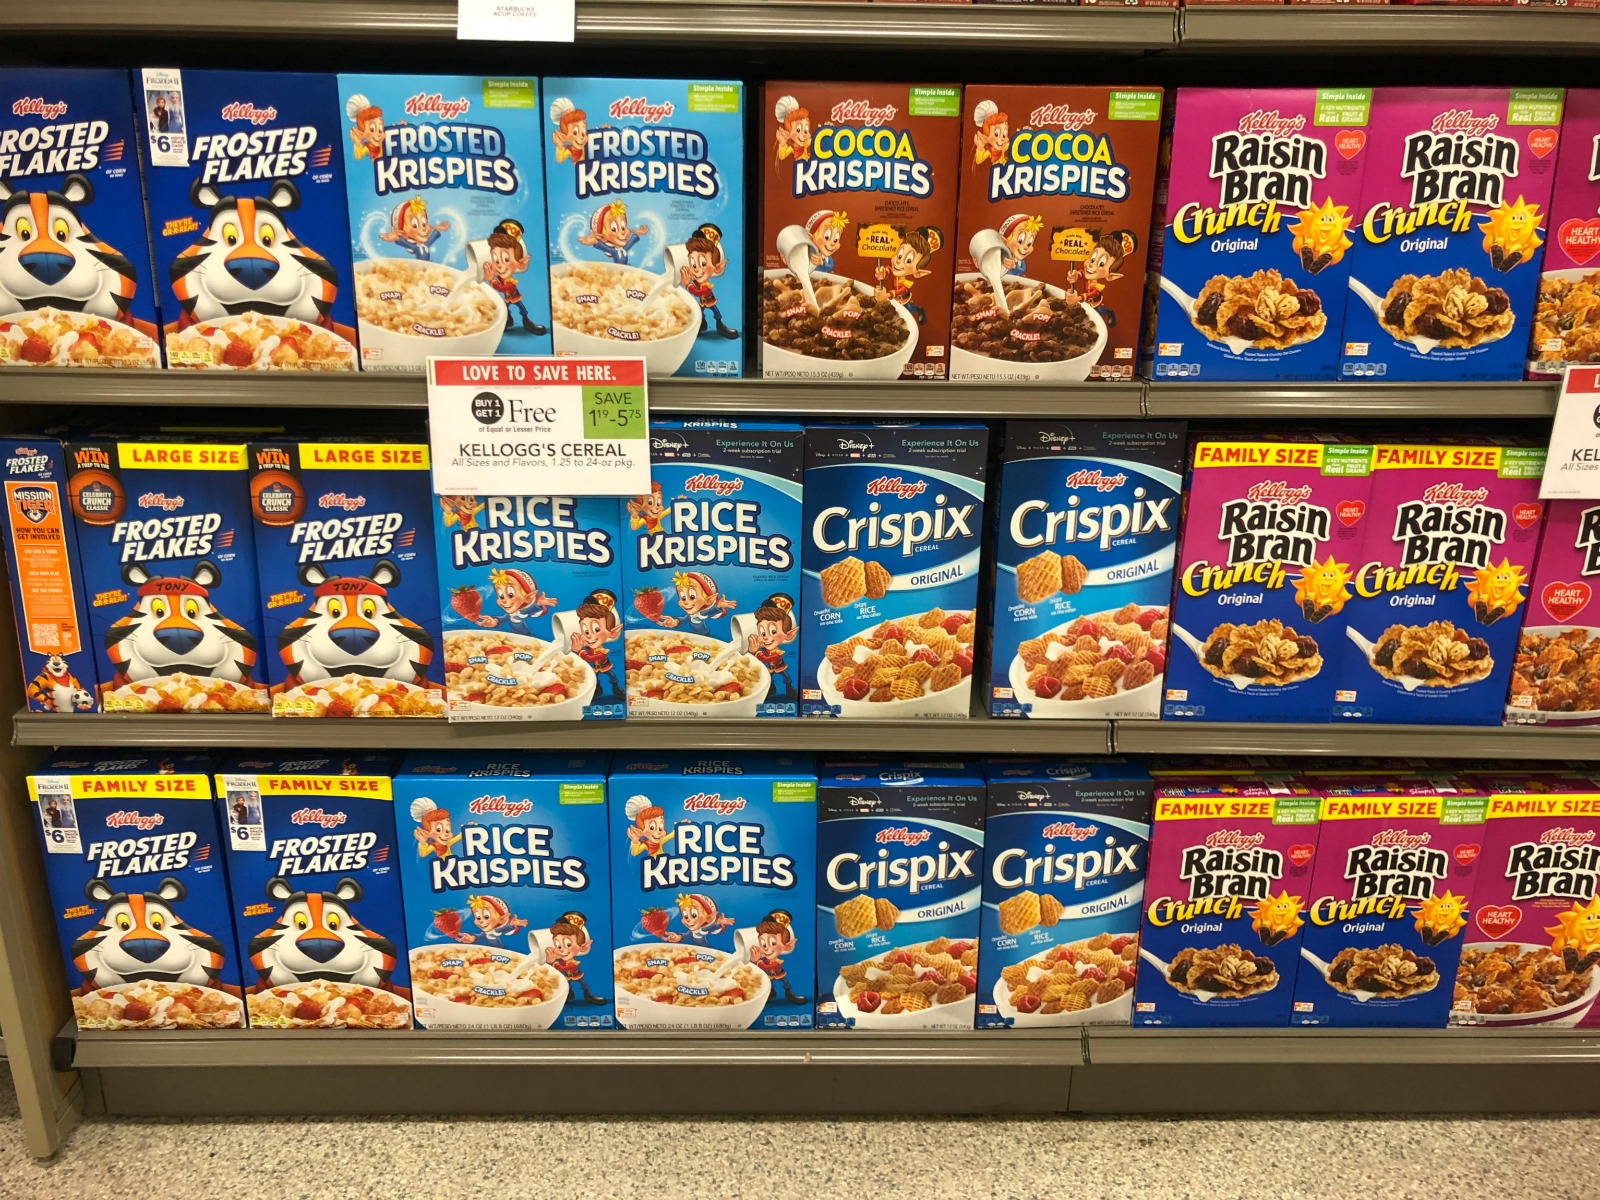 Every Single Kellogg's Cereal Is BOGO At Publix - Save On ALL Your Favorites! on I Heart Publix 1